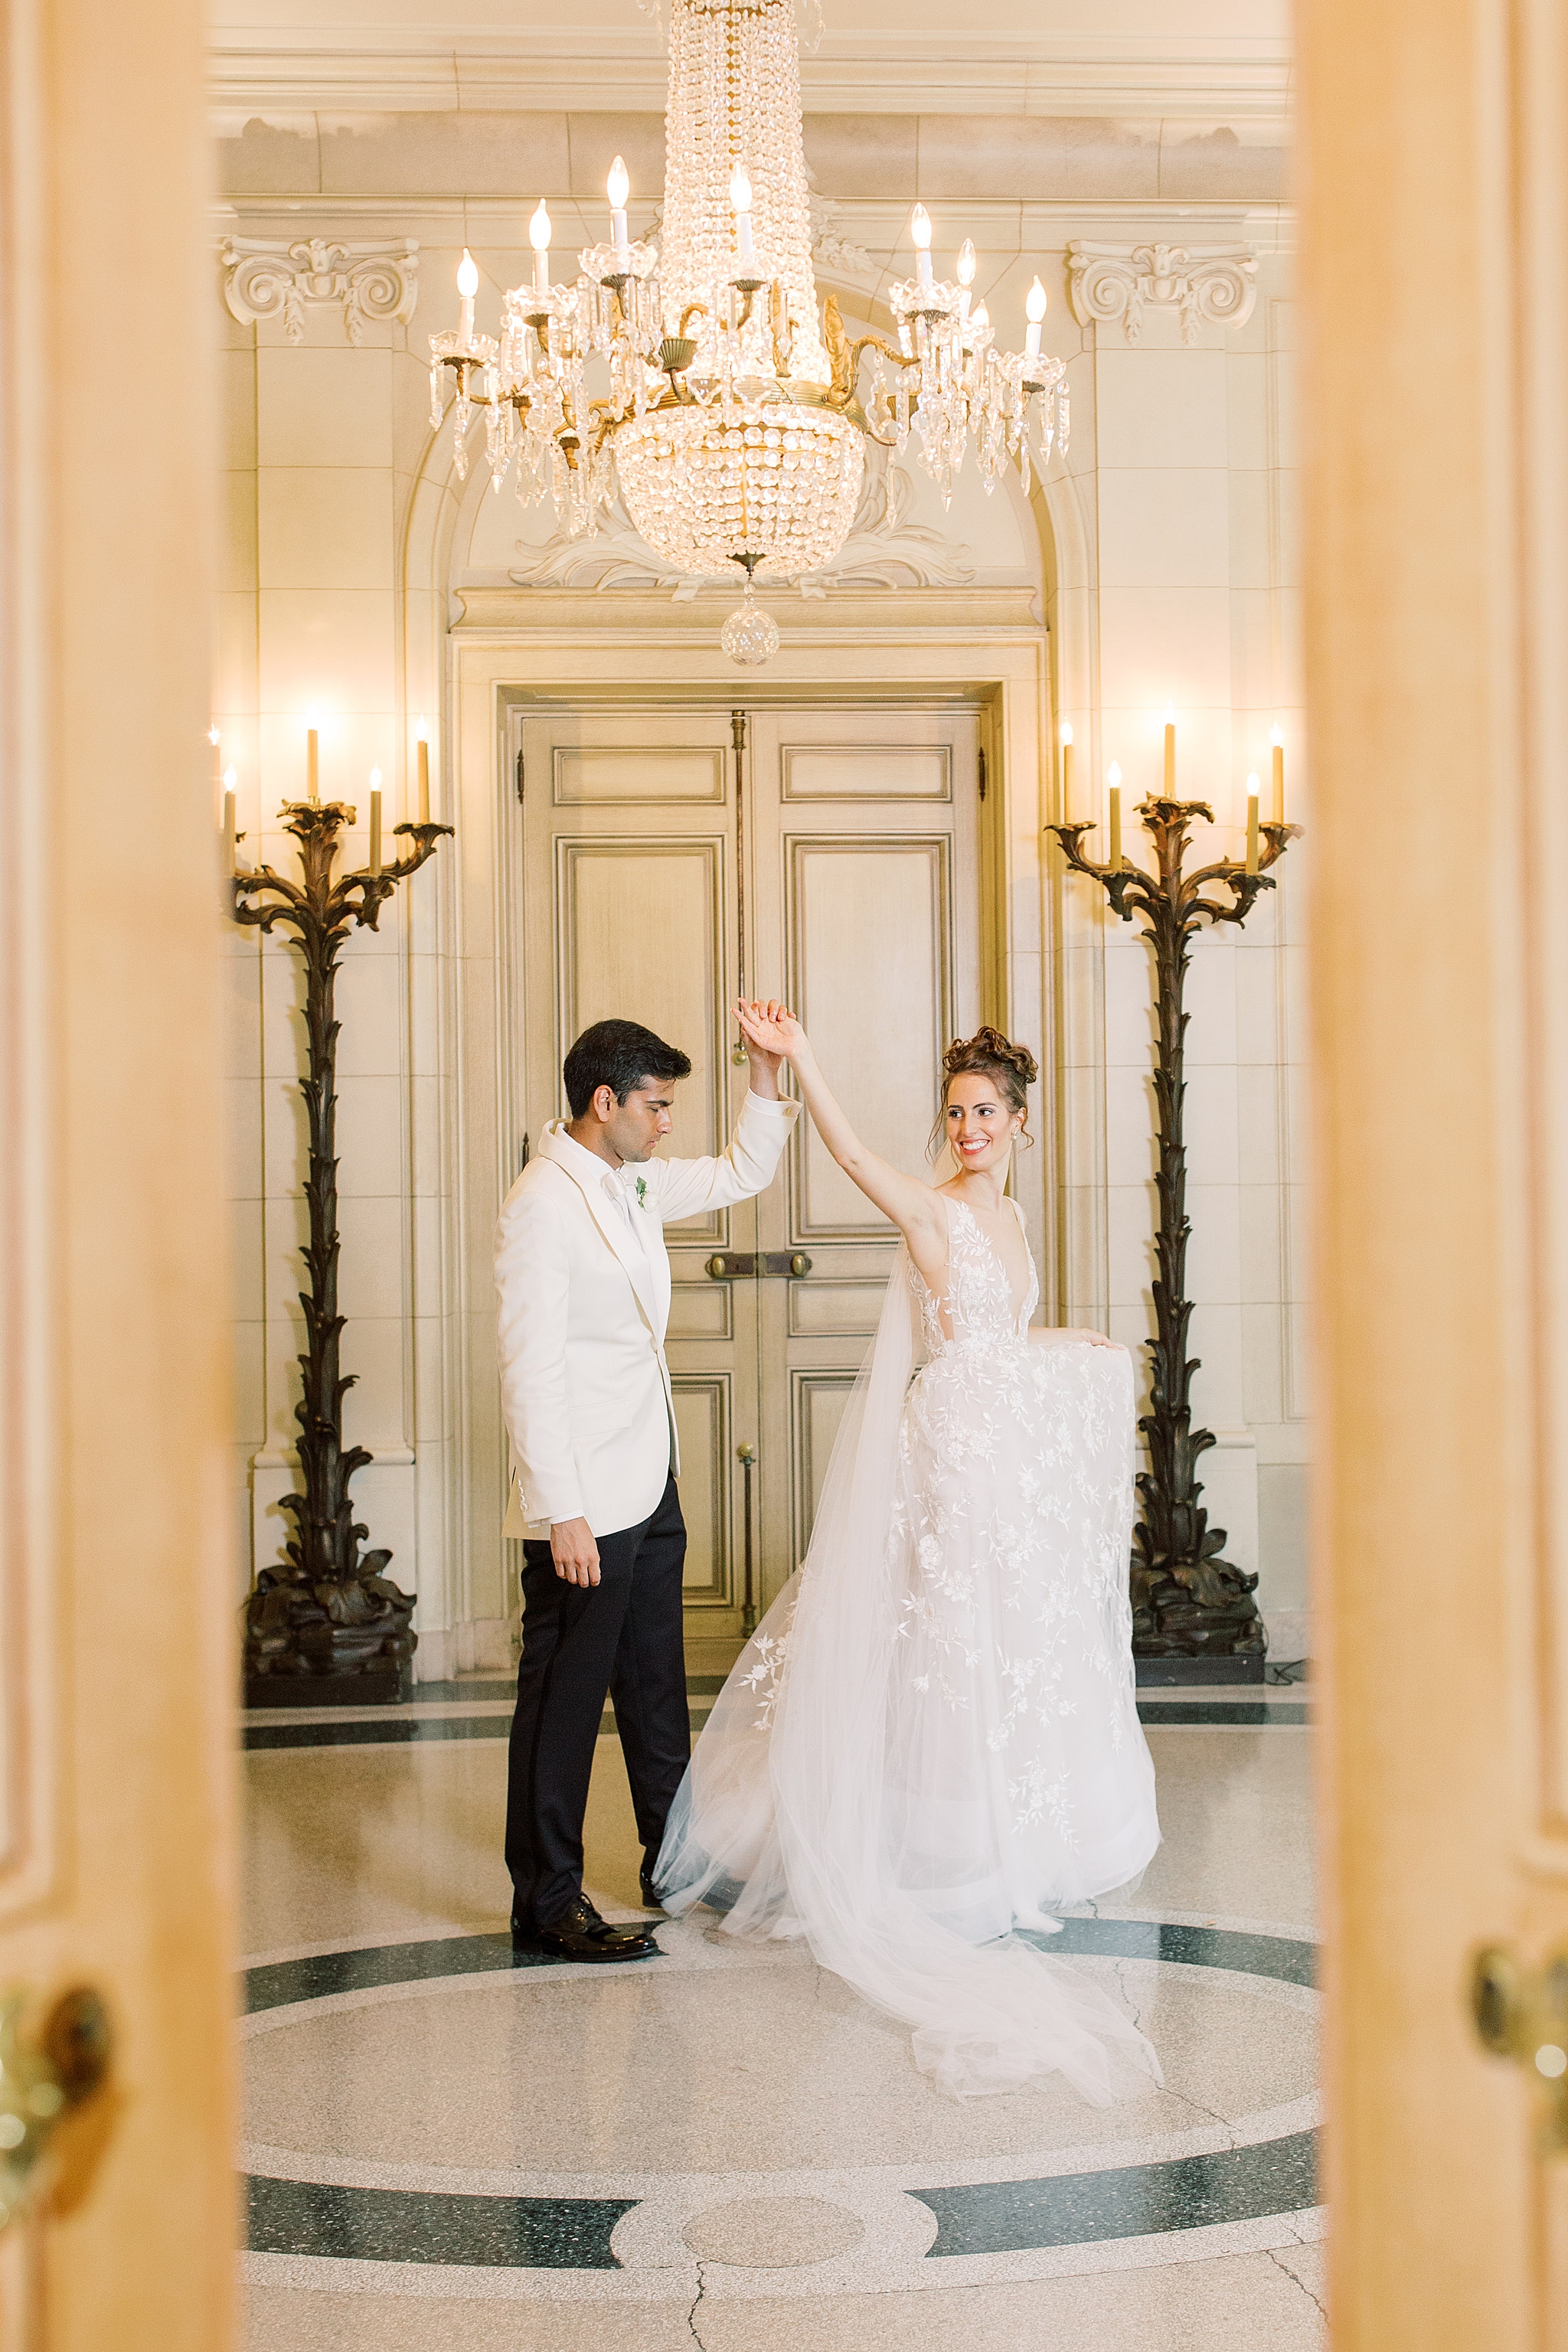 A couple's first dance during a wedding at the Meridian House in Washington, DC.